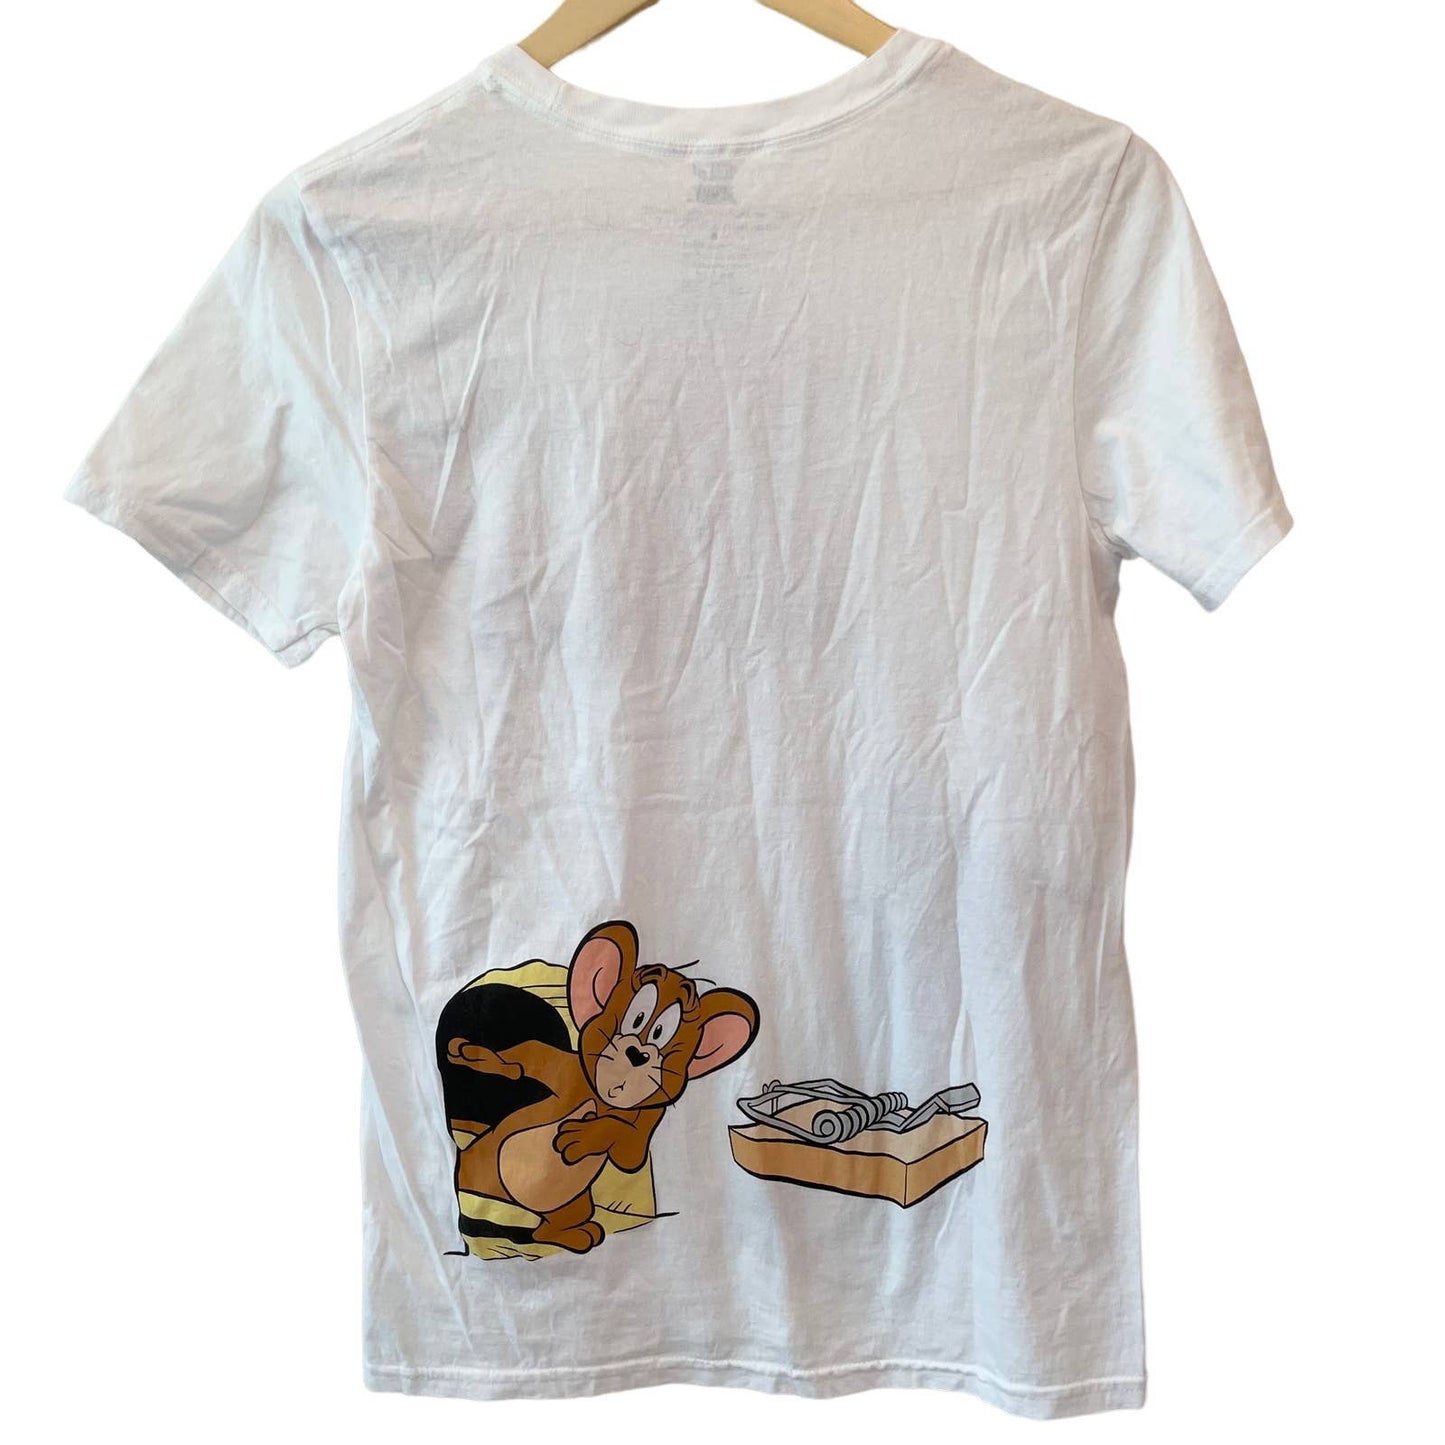 Tom & Jerry Vintage Inspired Graphic T-Shirt